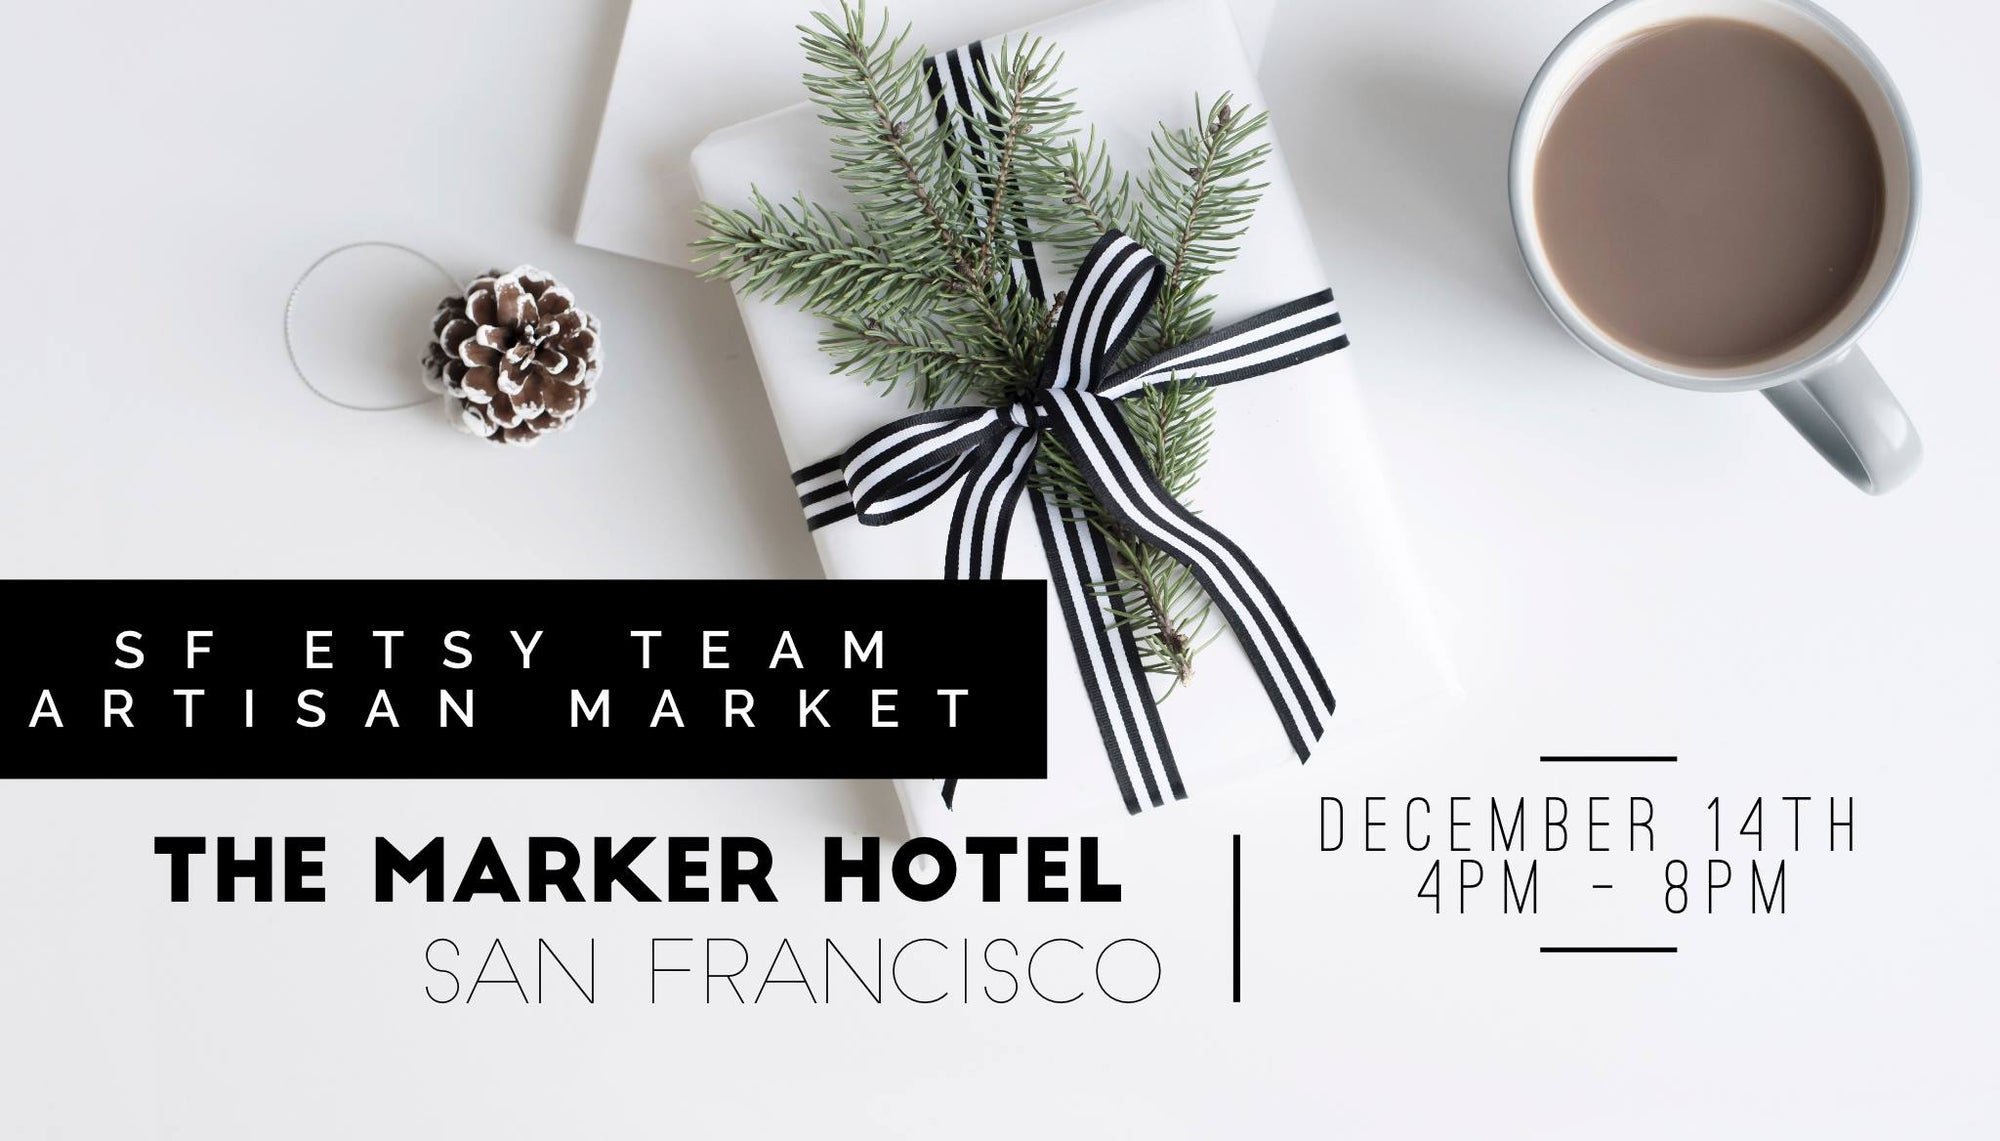 We're going to The Marker and Tratto Host SF Etsy Pop-up Event on December 14th Shop Local, Handmade Gifts by SF Etsy Artists This Holiday Season